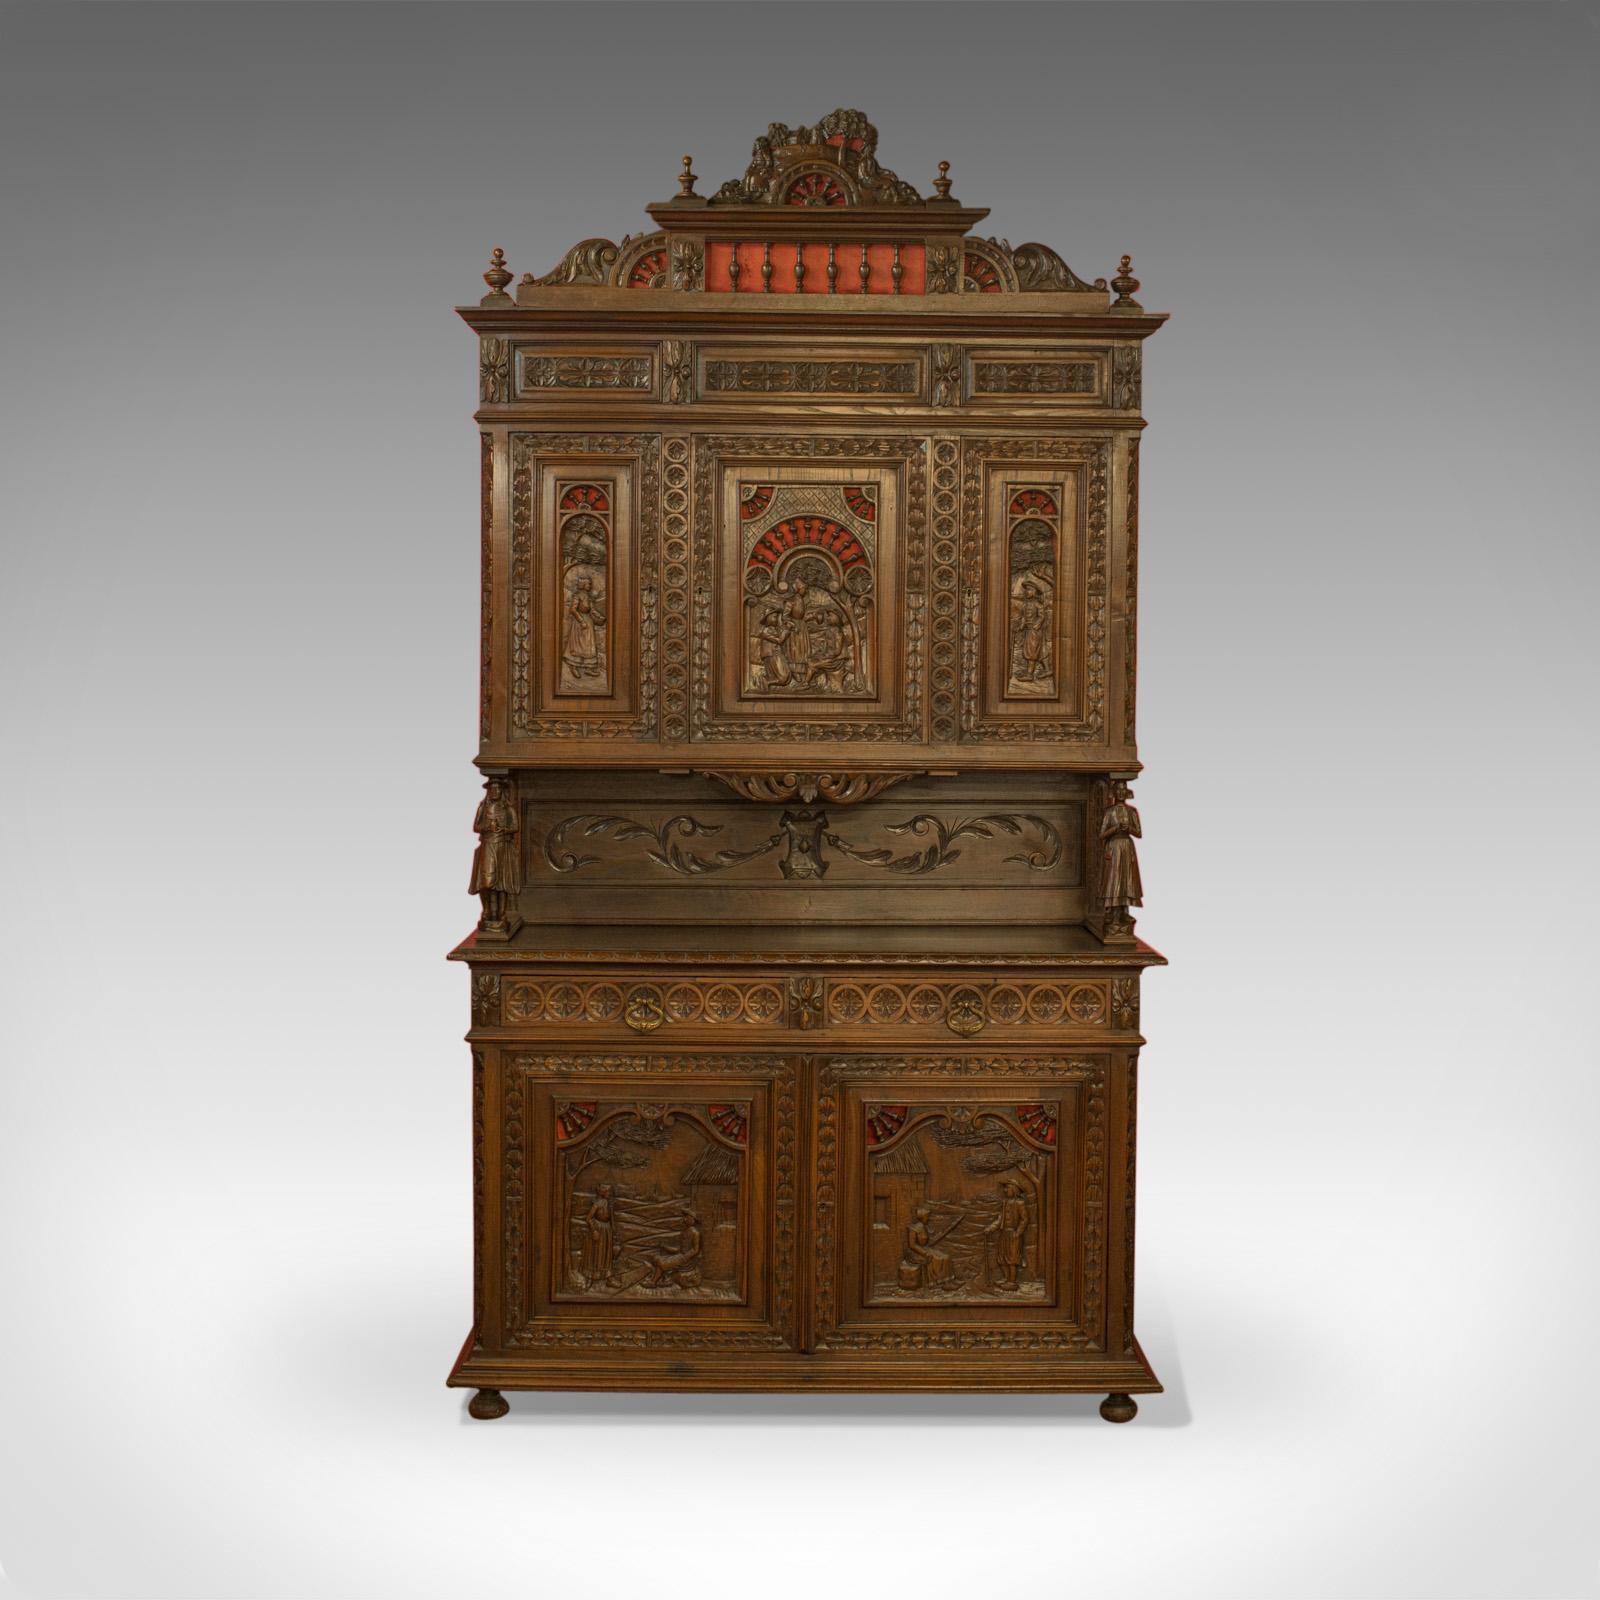 This is an antique carved Breton buffet cabinet. A French sideboard crafted in oak in the late 19th century, circa 1880.

An ornate example of French, Breton cabinetry displaying bountiful detail
Displaying a fine lustre in the wax polished